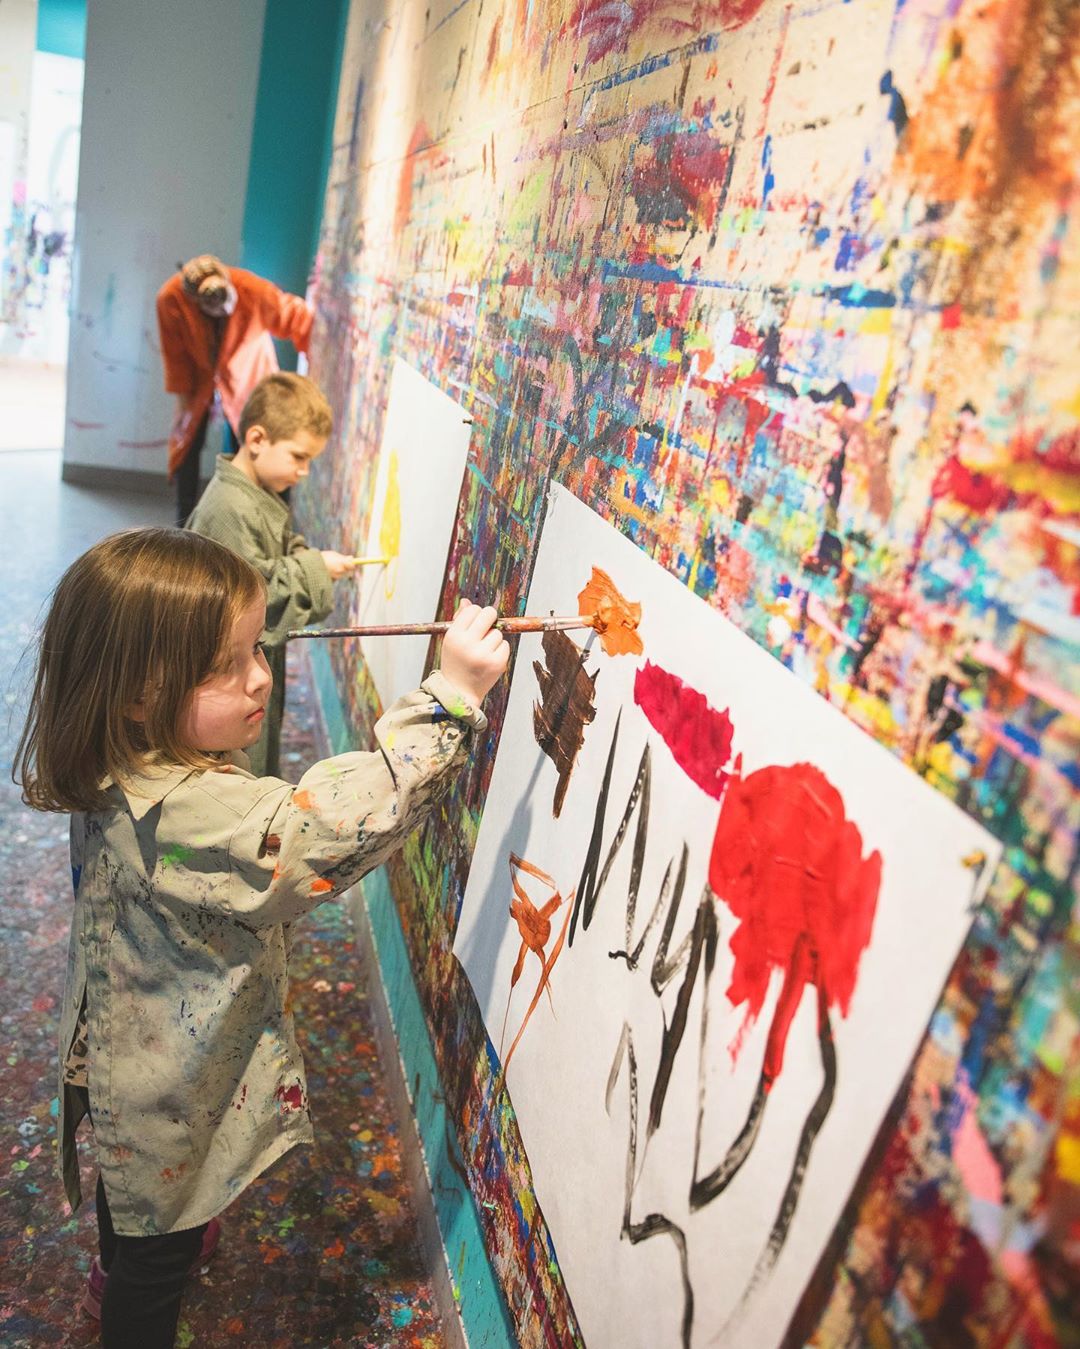 Two Girls Painting on the Wall at Minnesota Children's Museum. Photo by Instagram user @mnchildmuseum